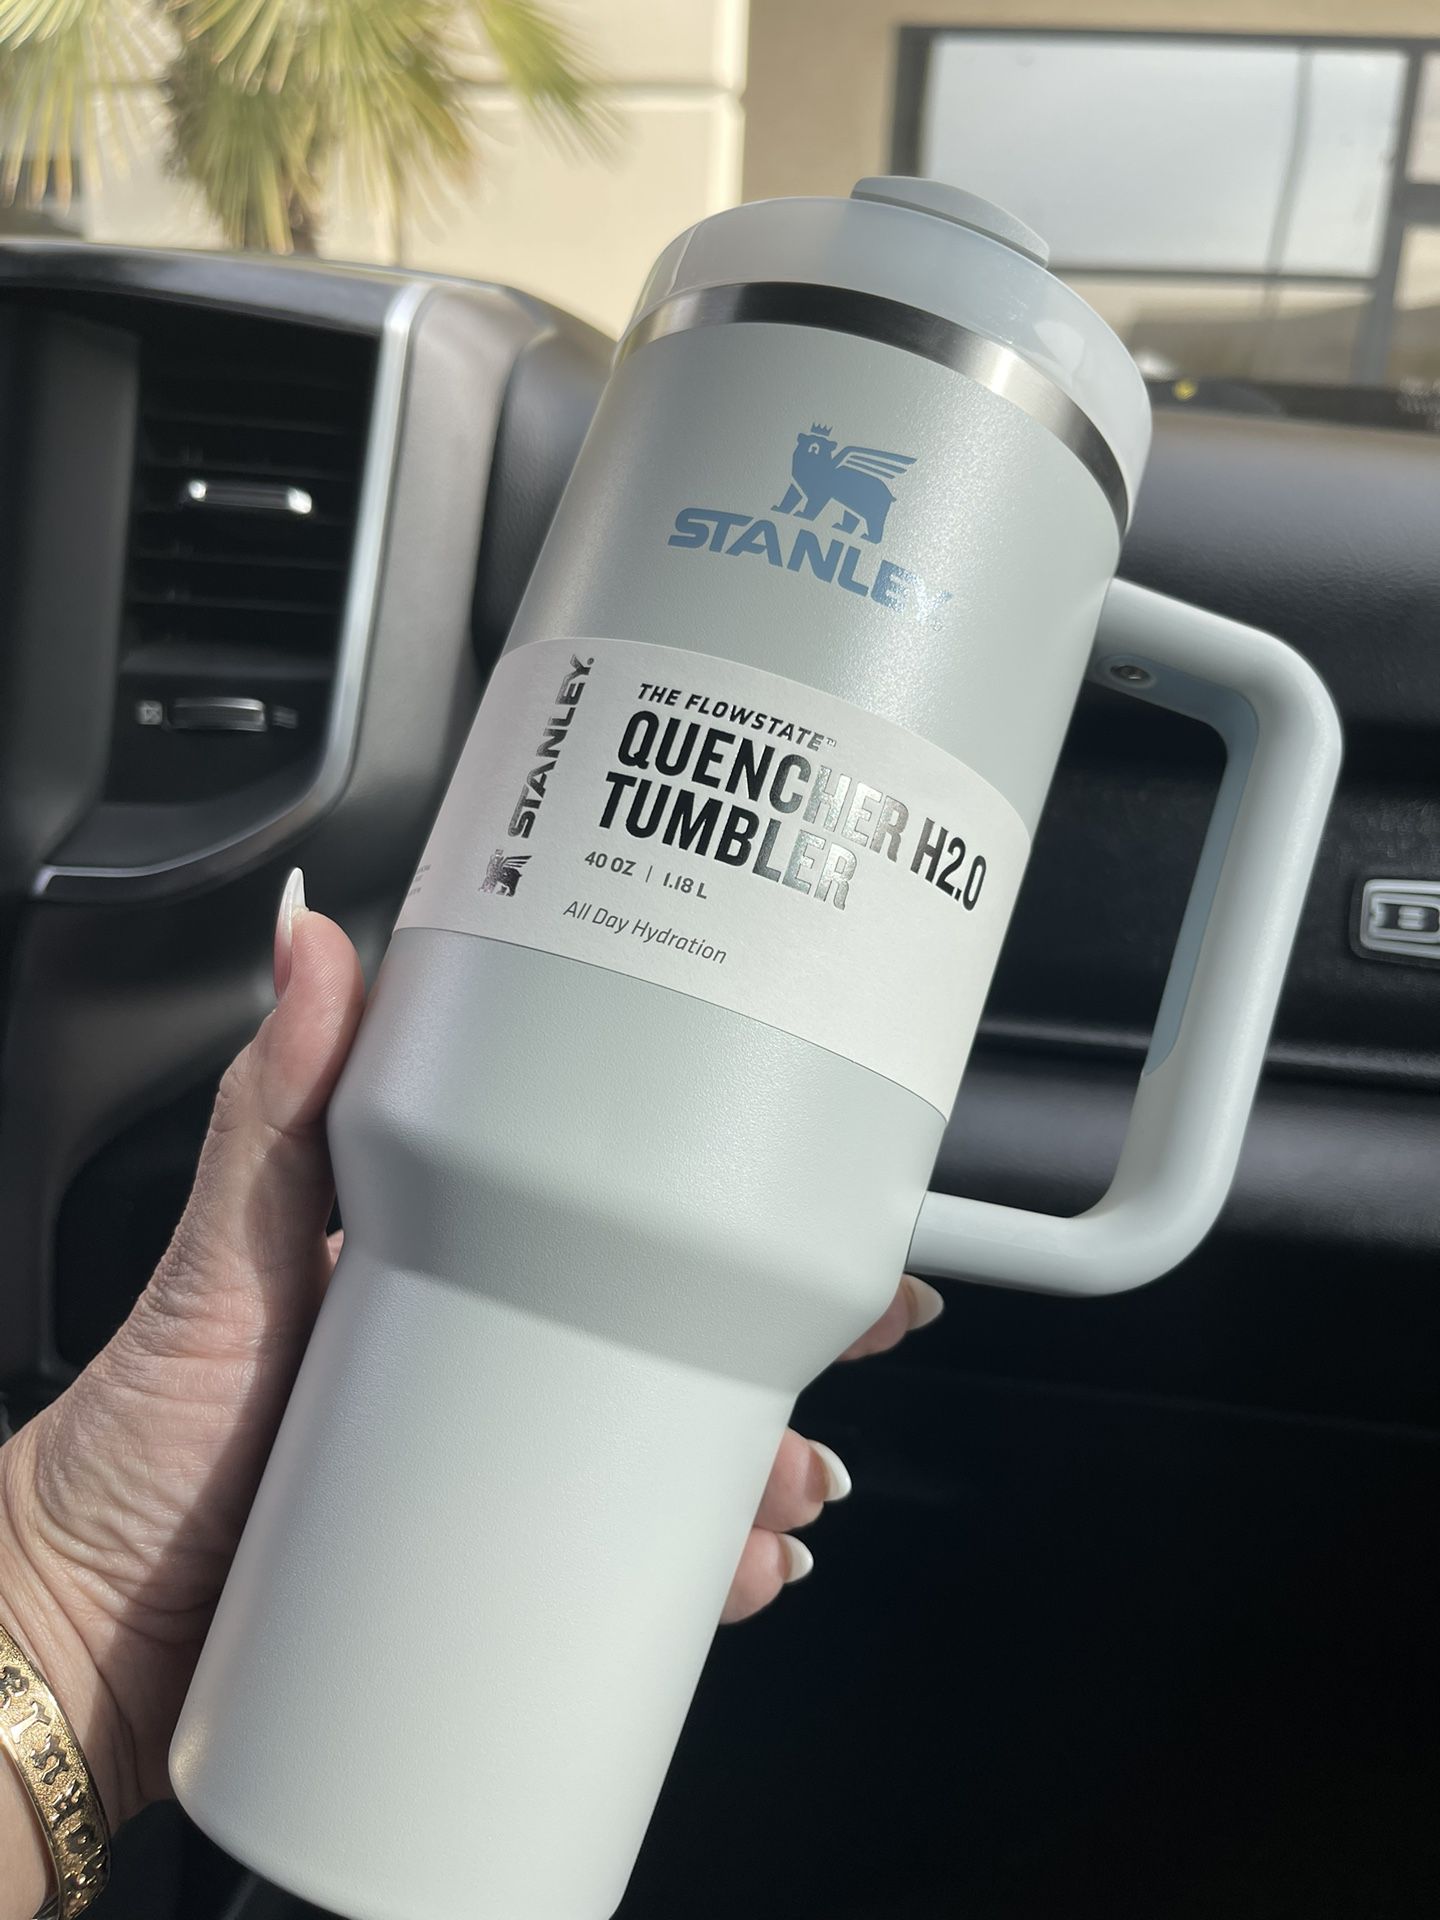 BRAND NEW WITH TAGS! STANLEY 40 Oz Tumbler/cup - Cornflower (blue) for Sale  in Portland, OR - OfferUp